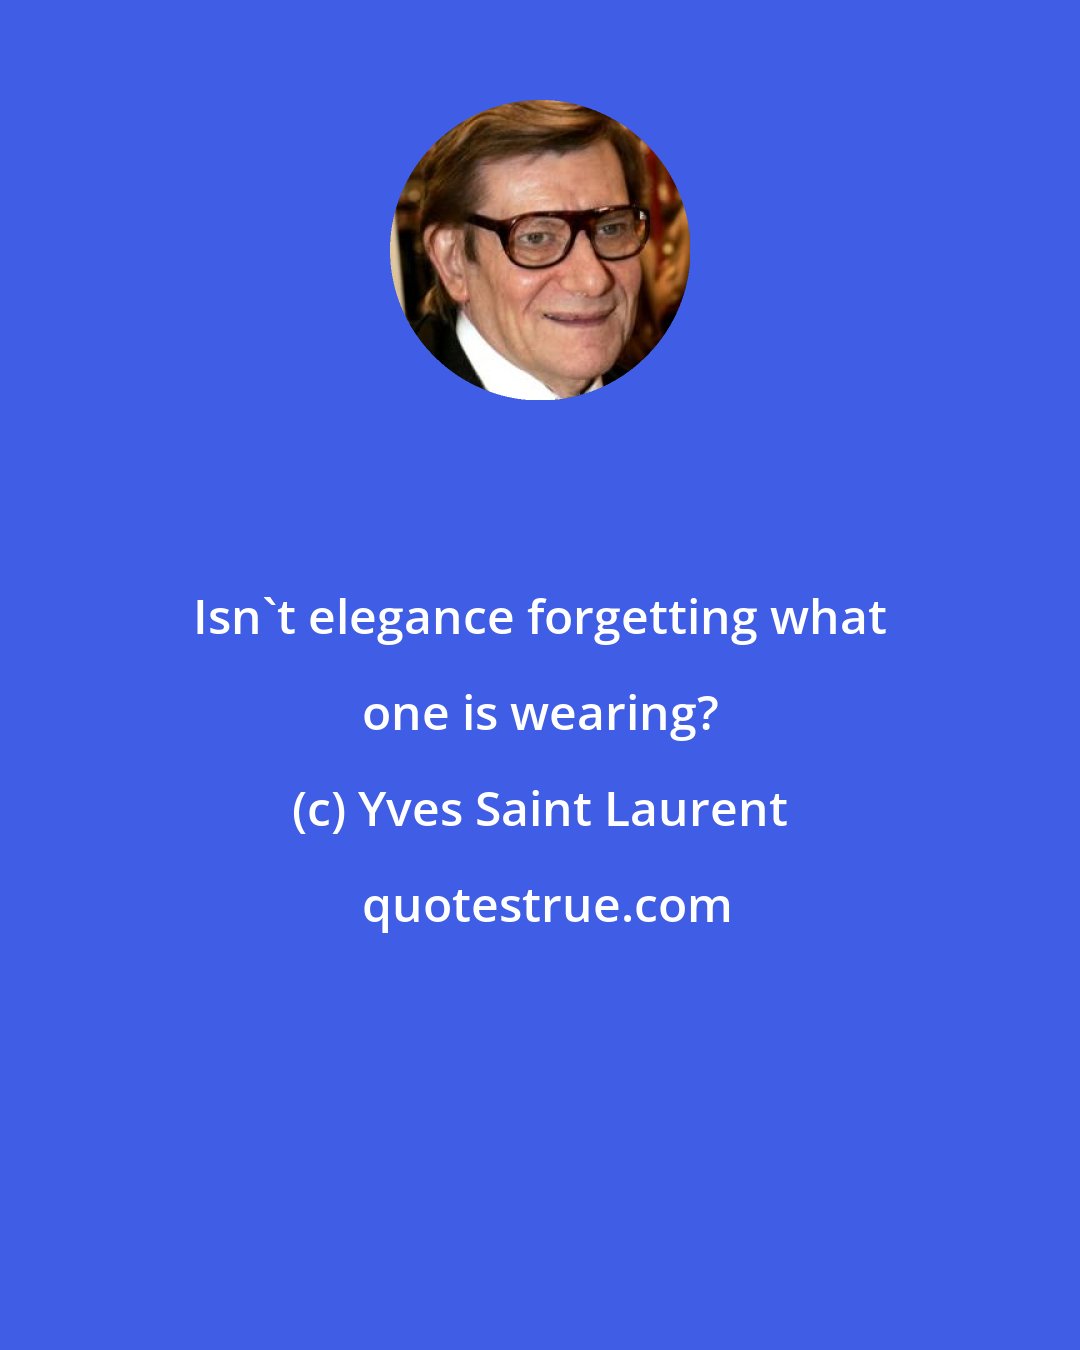 Yves Saint Laurent: Isn't elegance forgetting what one is wearing?